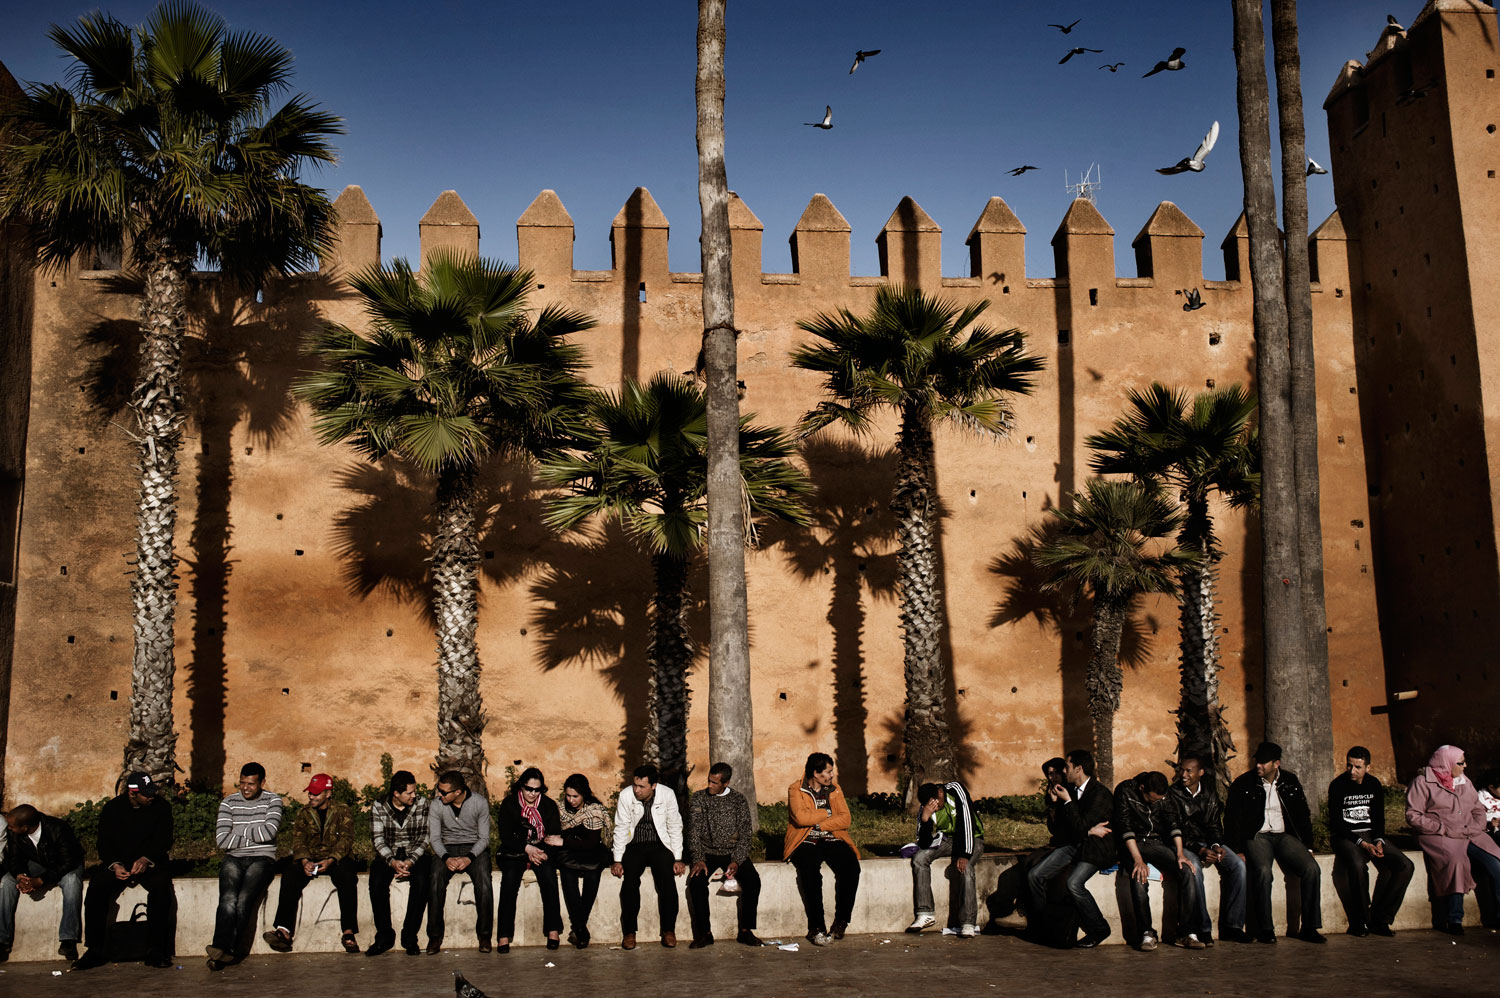 March 2012. Young Moroccans hang out in front of the Casbah of Oudaya, in a 12th-century fortress in Rabat, Morocco.